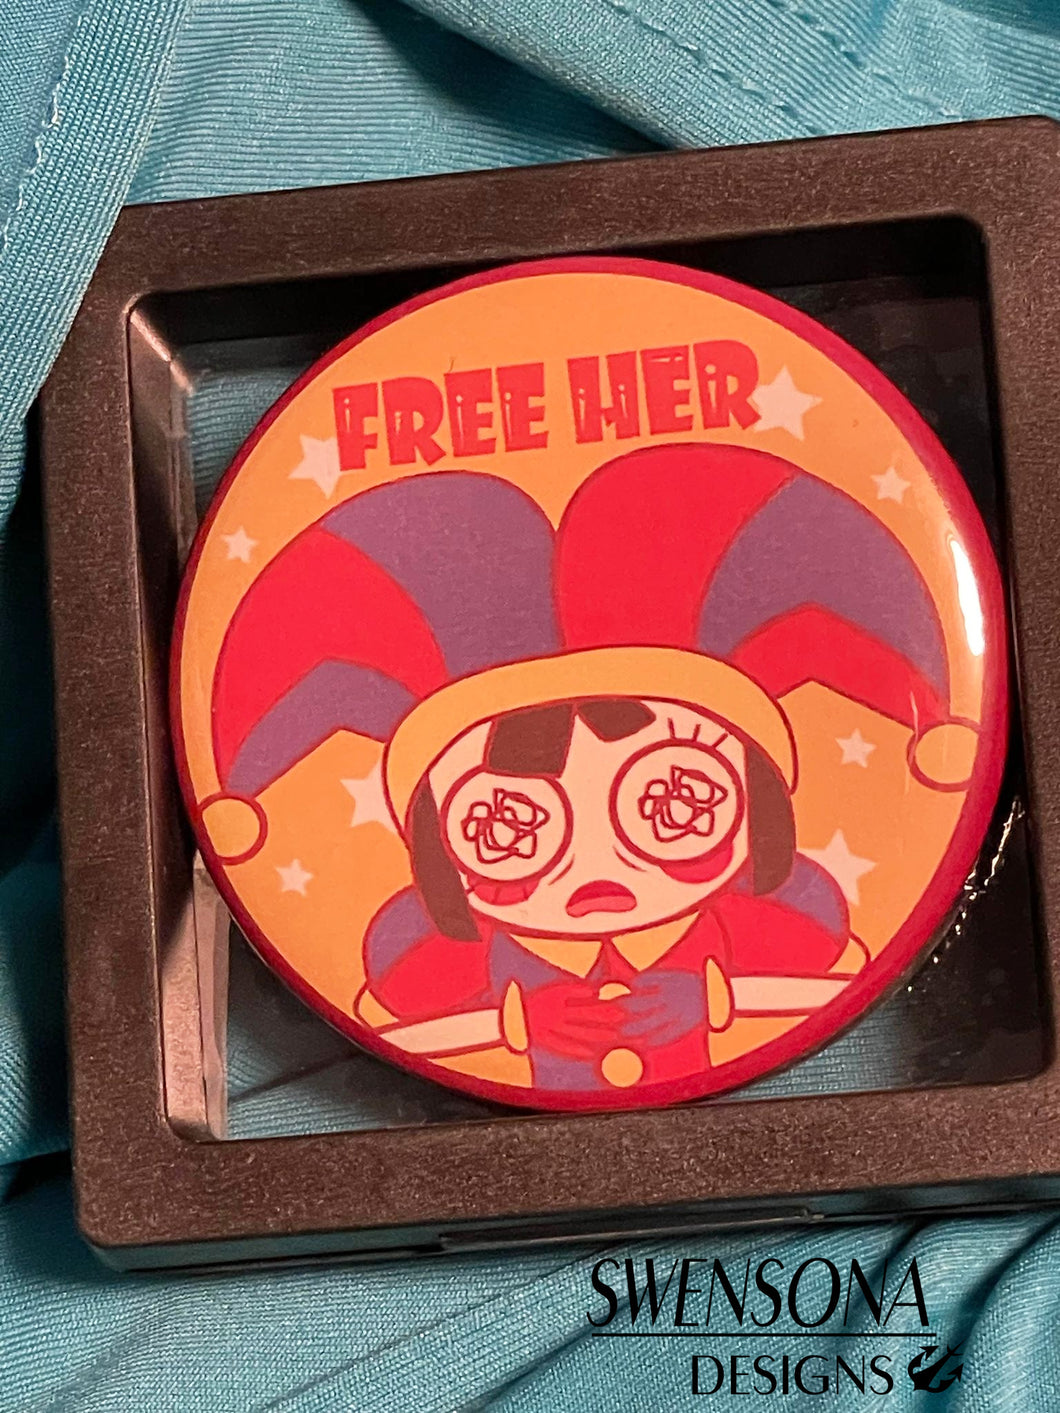 Free her button badge